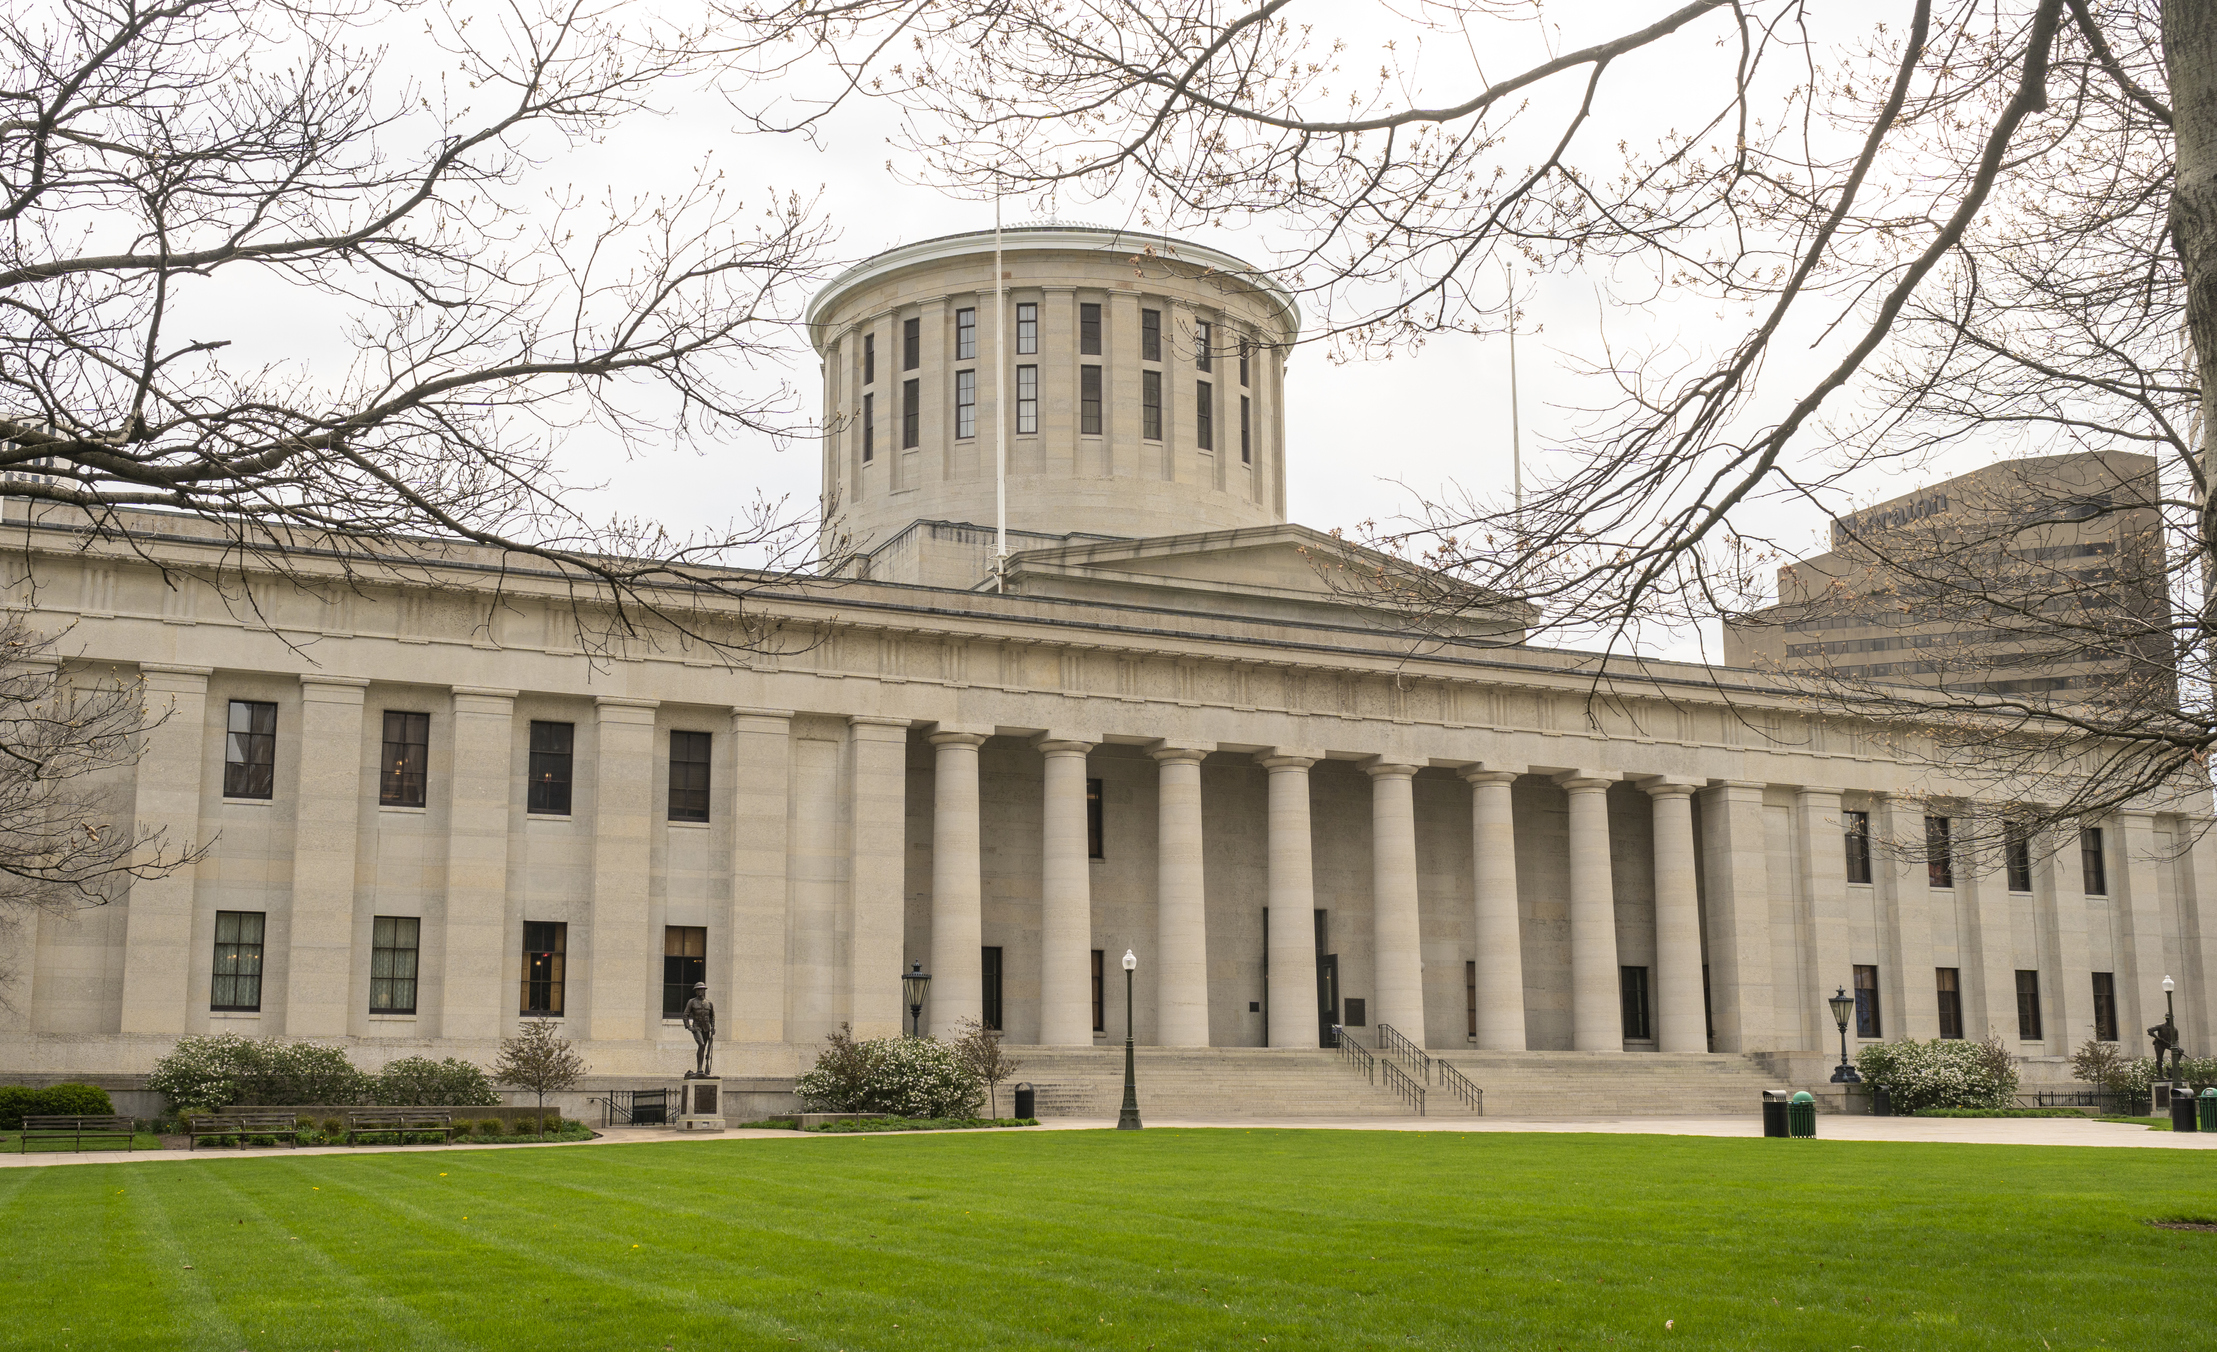 Ohio government statehouse in Columbus. (Getty Images/iStockphoto&mdash;Copyright 2019 Christopher Boswell)